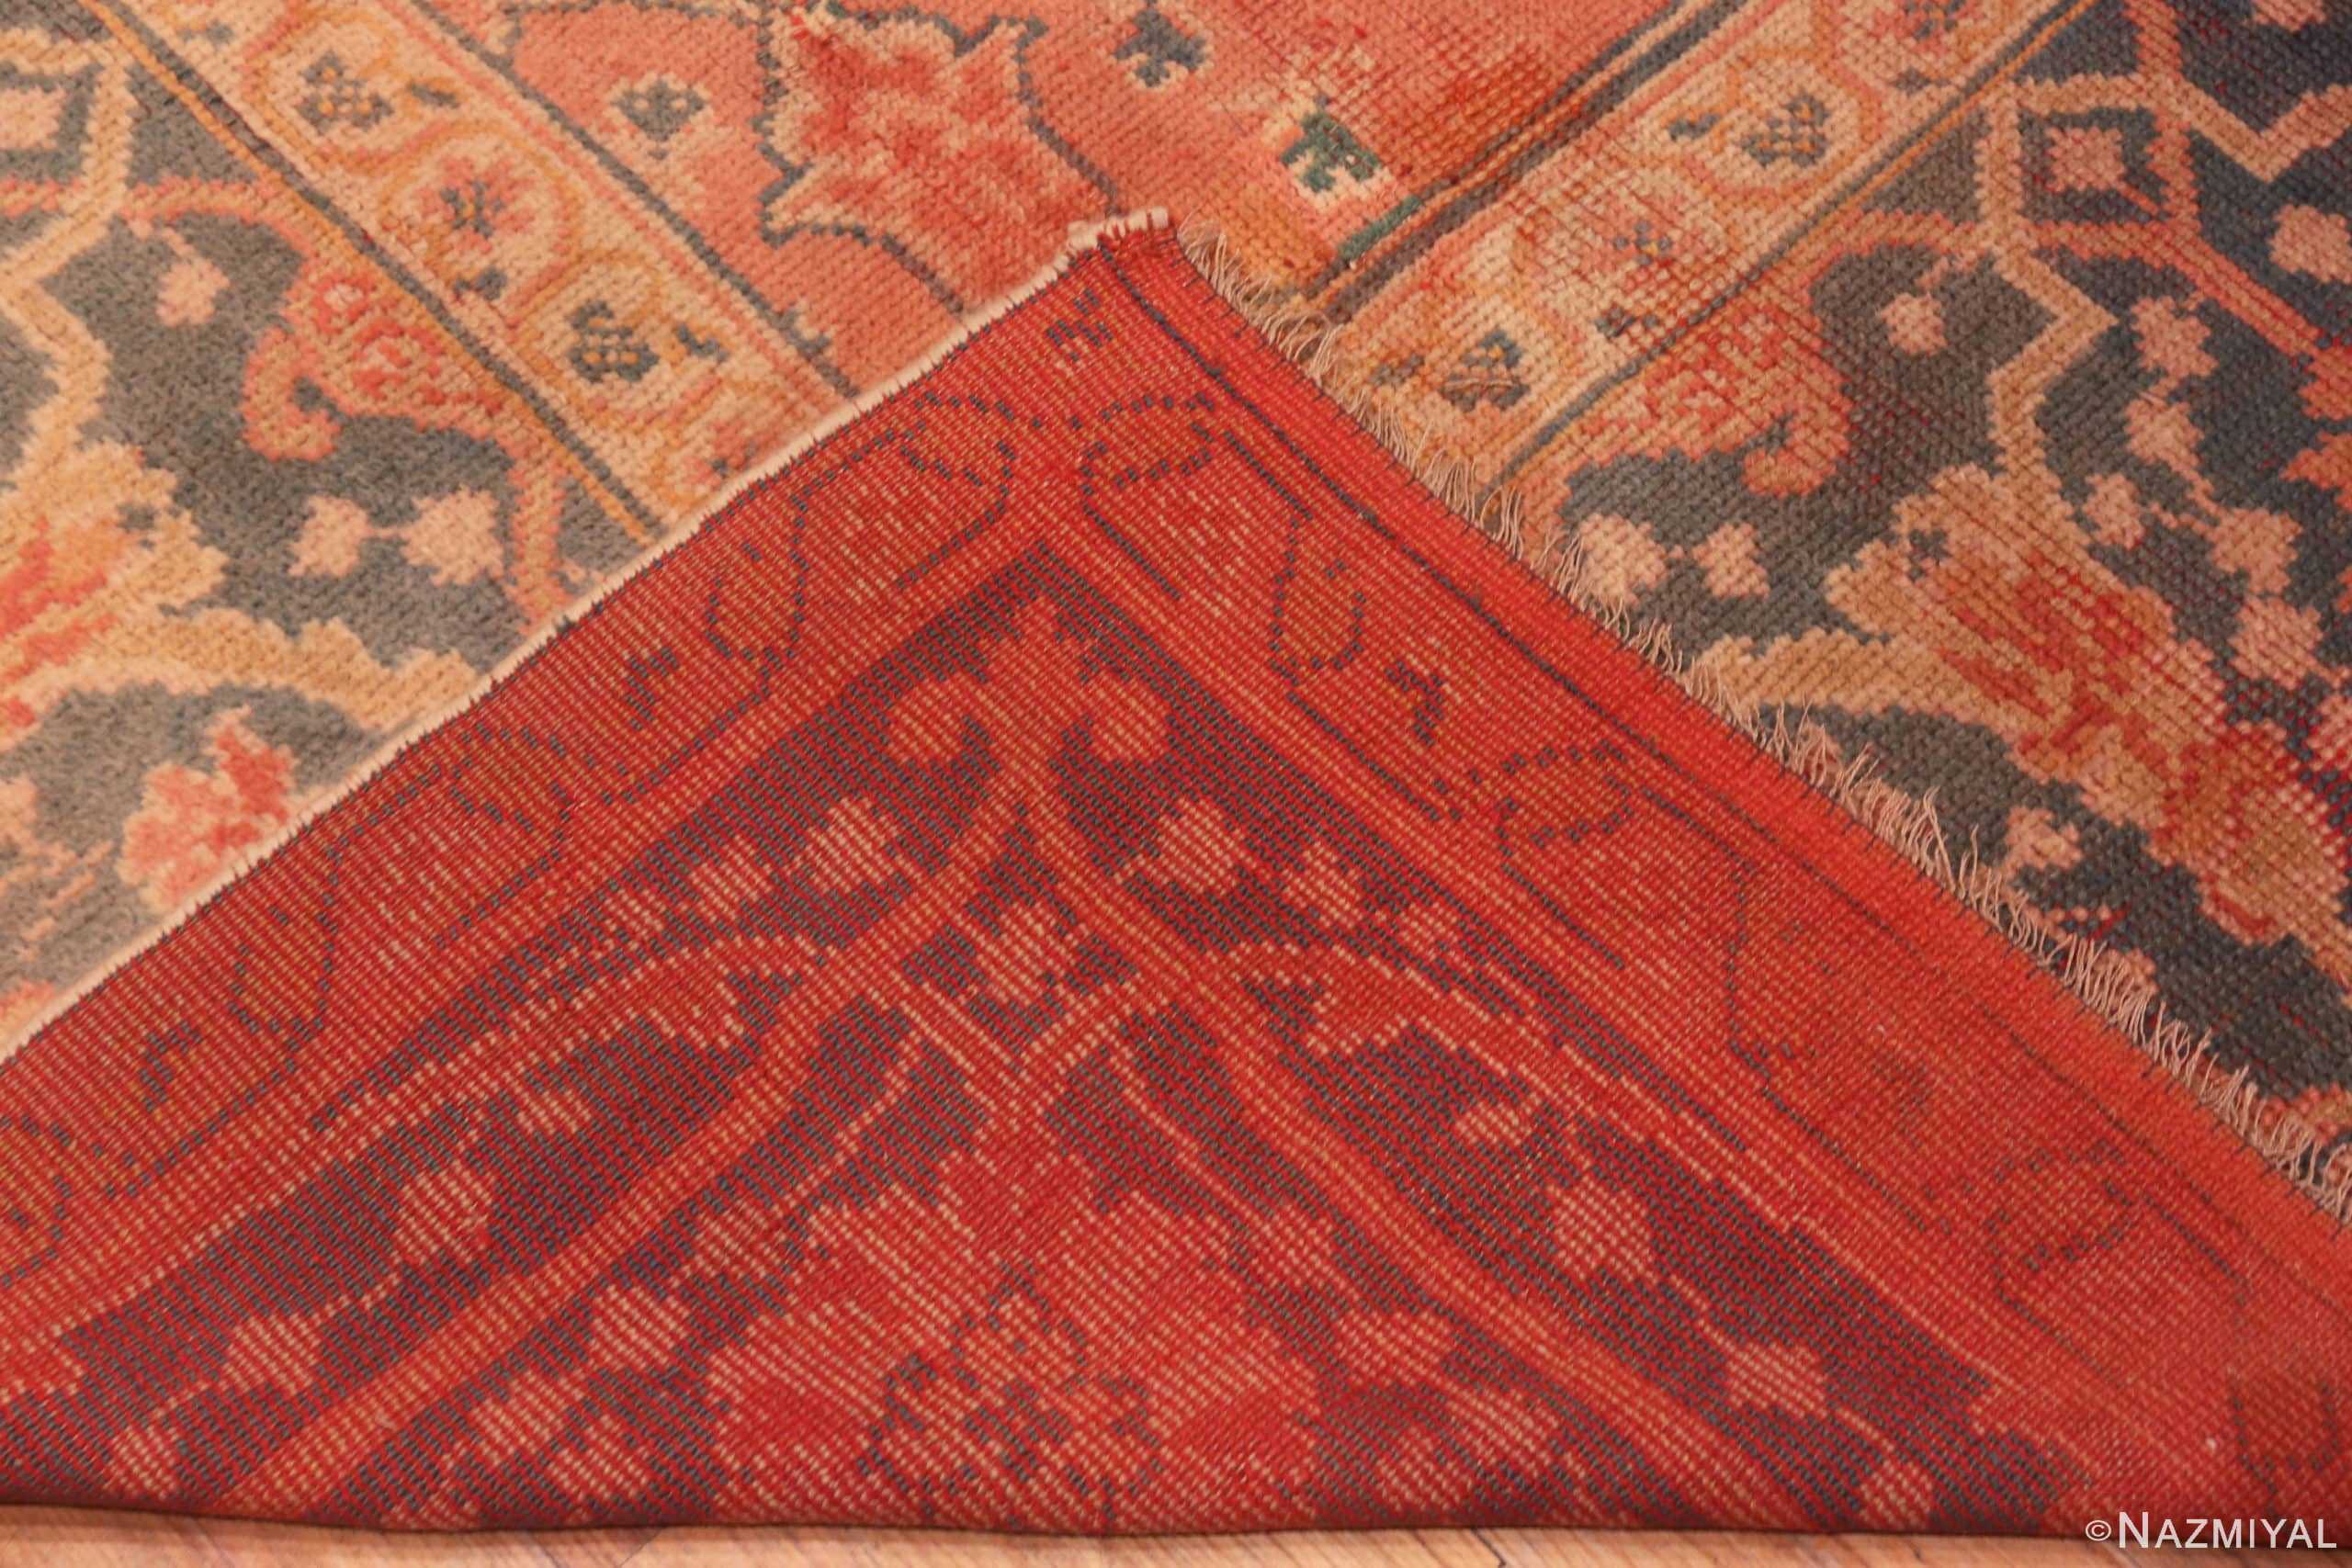 Weave Of Large Coral Antique Turkish Oushak Area Rug 70876 by Nazmiyal Antique Rugs